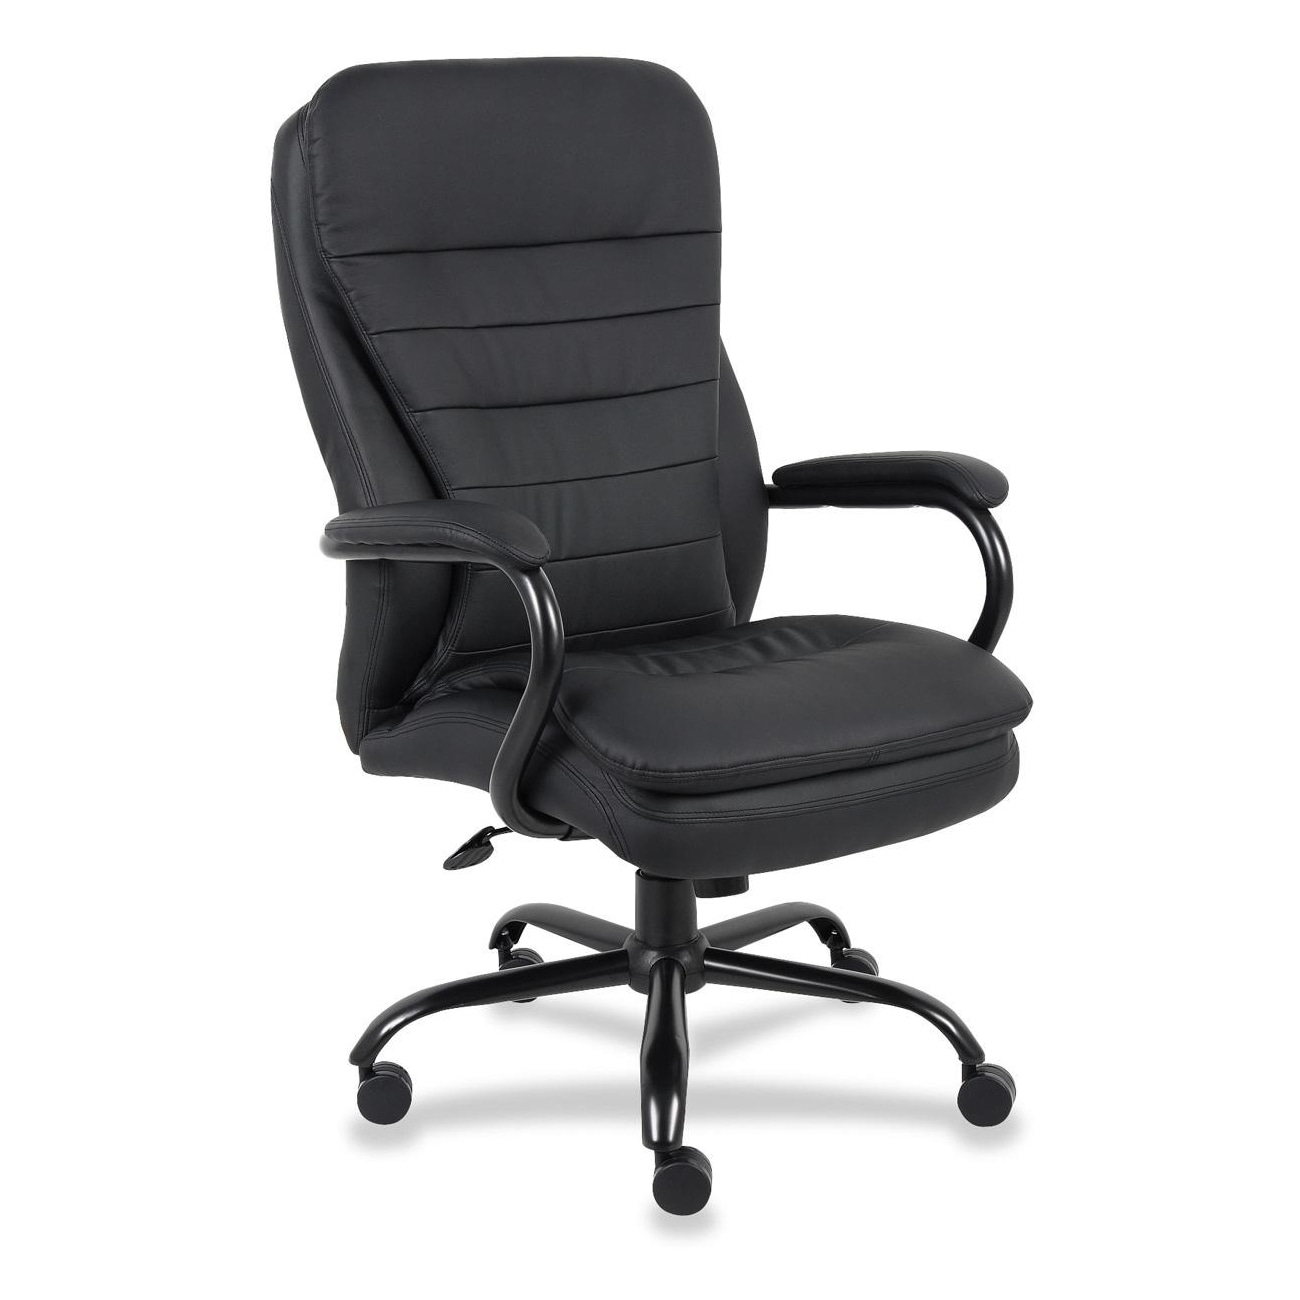 Shop Lorell Executive Swivel Chair Overstock 9121867